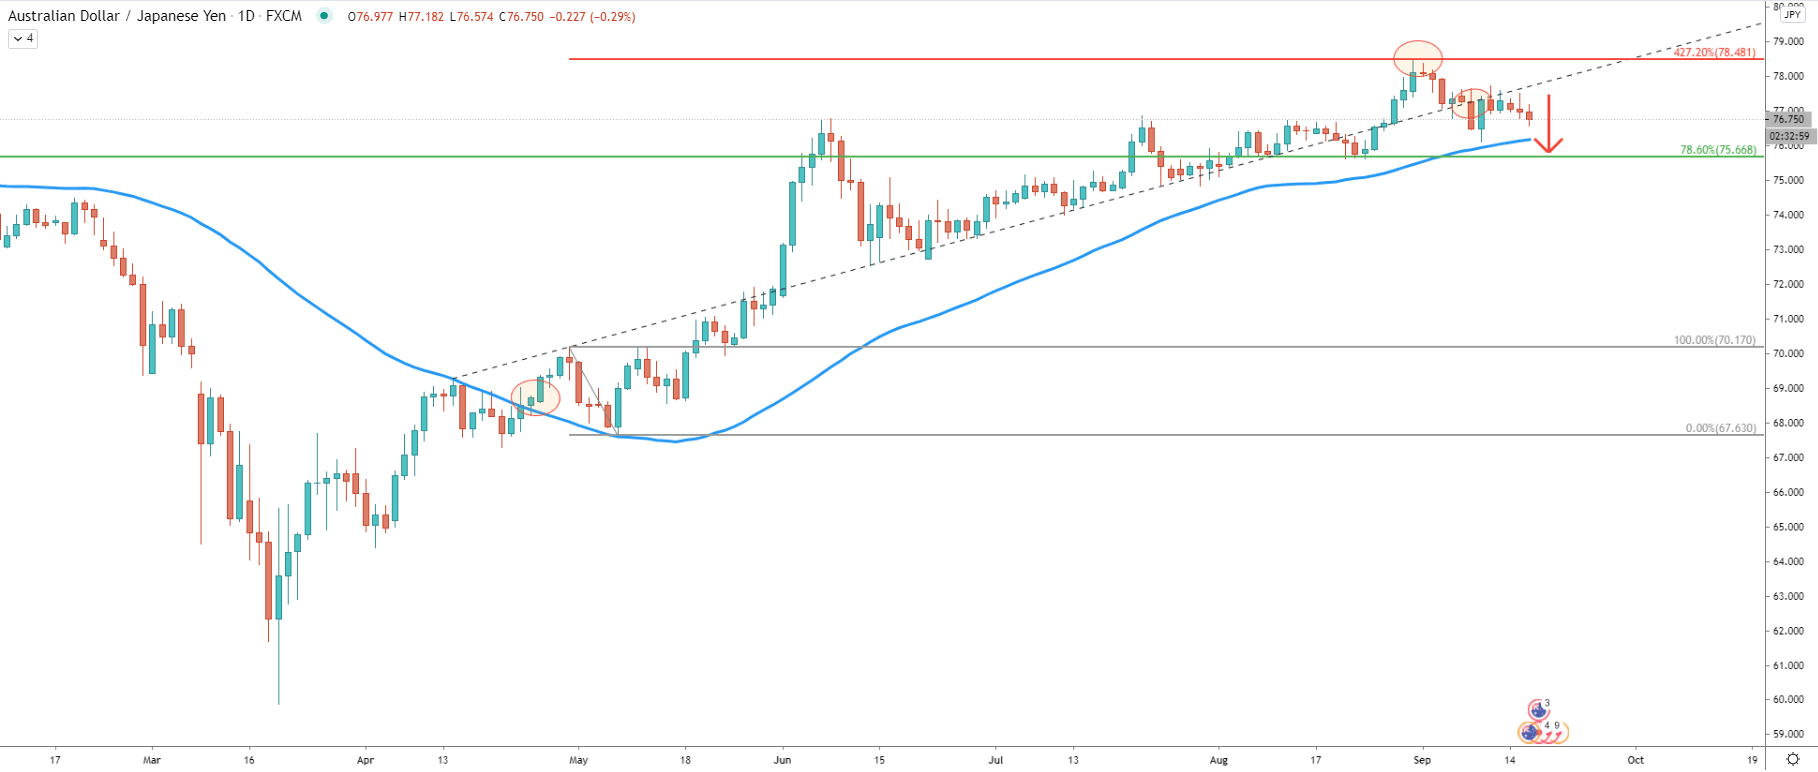 AUD/JPY Daily Technical Analysis 16 Sep 2020